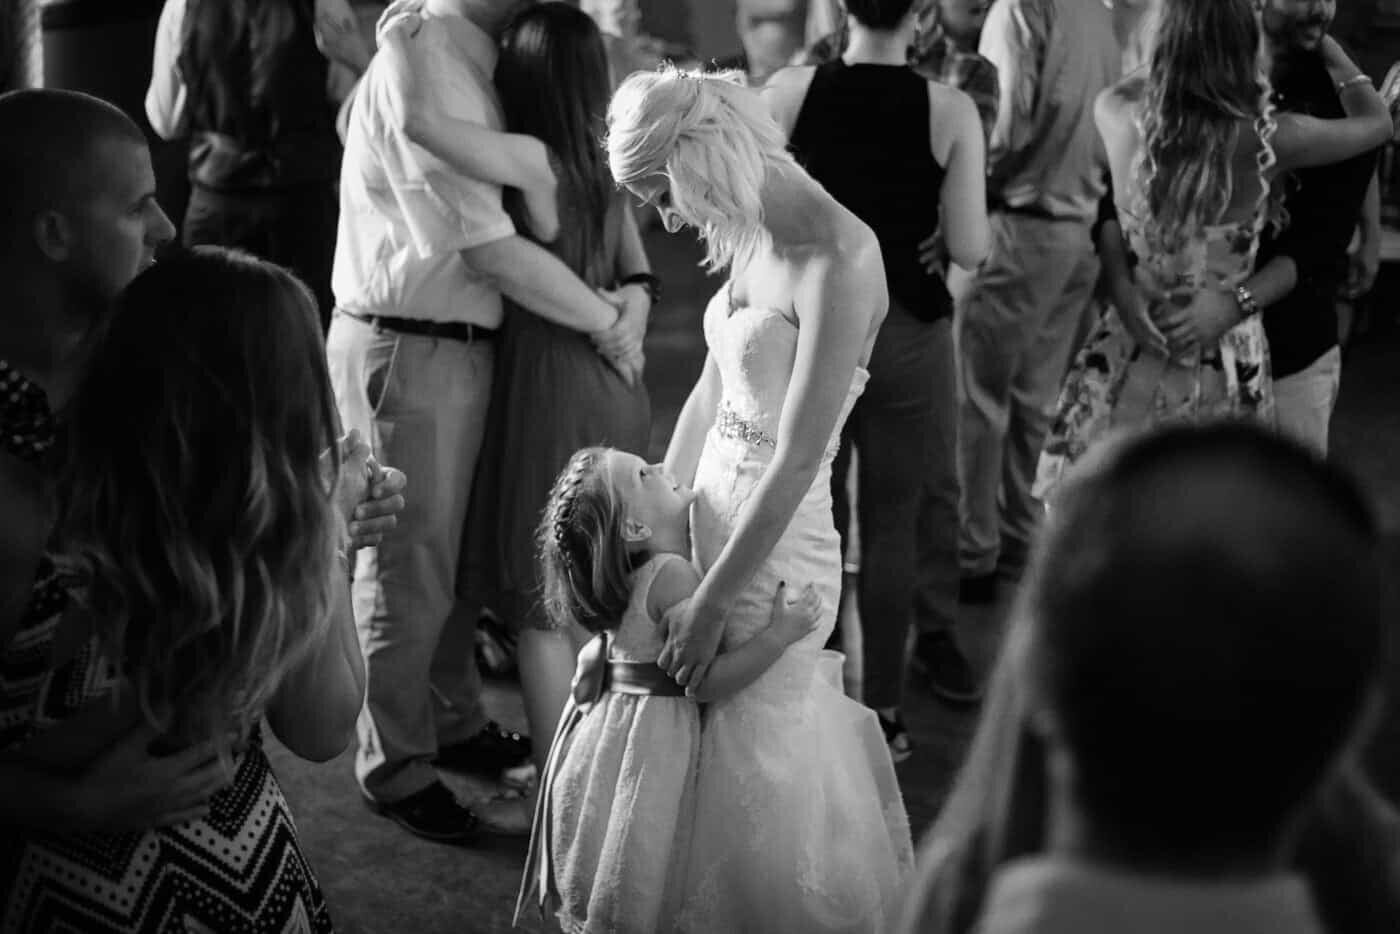 A bride and flower girl share a dance during her Catholic wedding in Northern Virginia